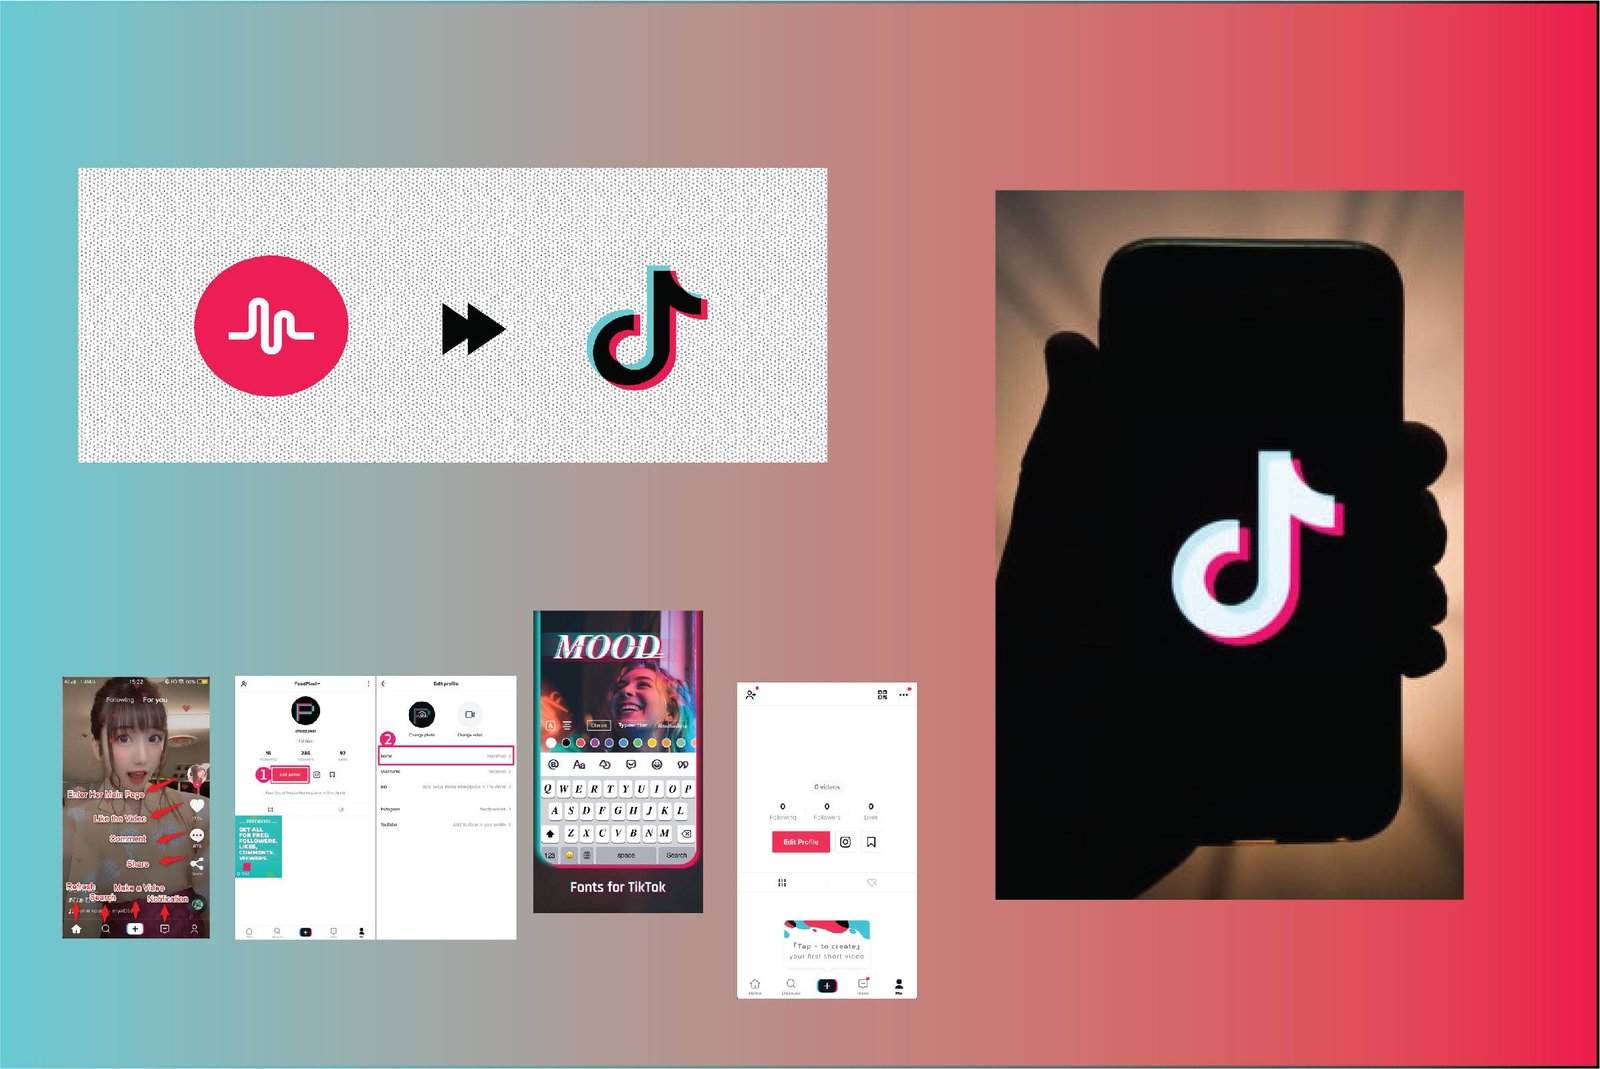 TikTok 101 Guide: Facts, Numbers, & Statistics